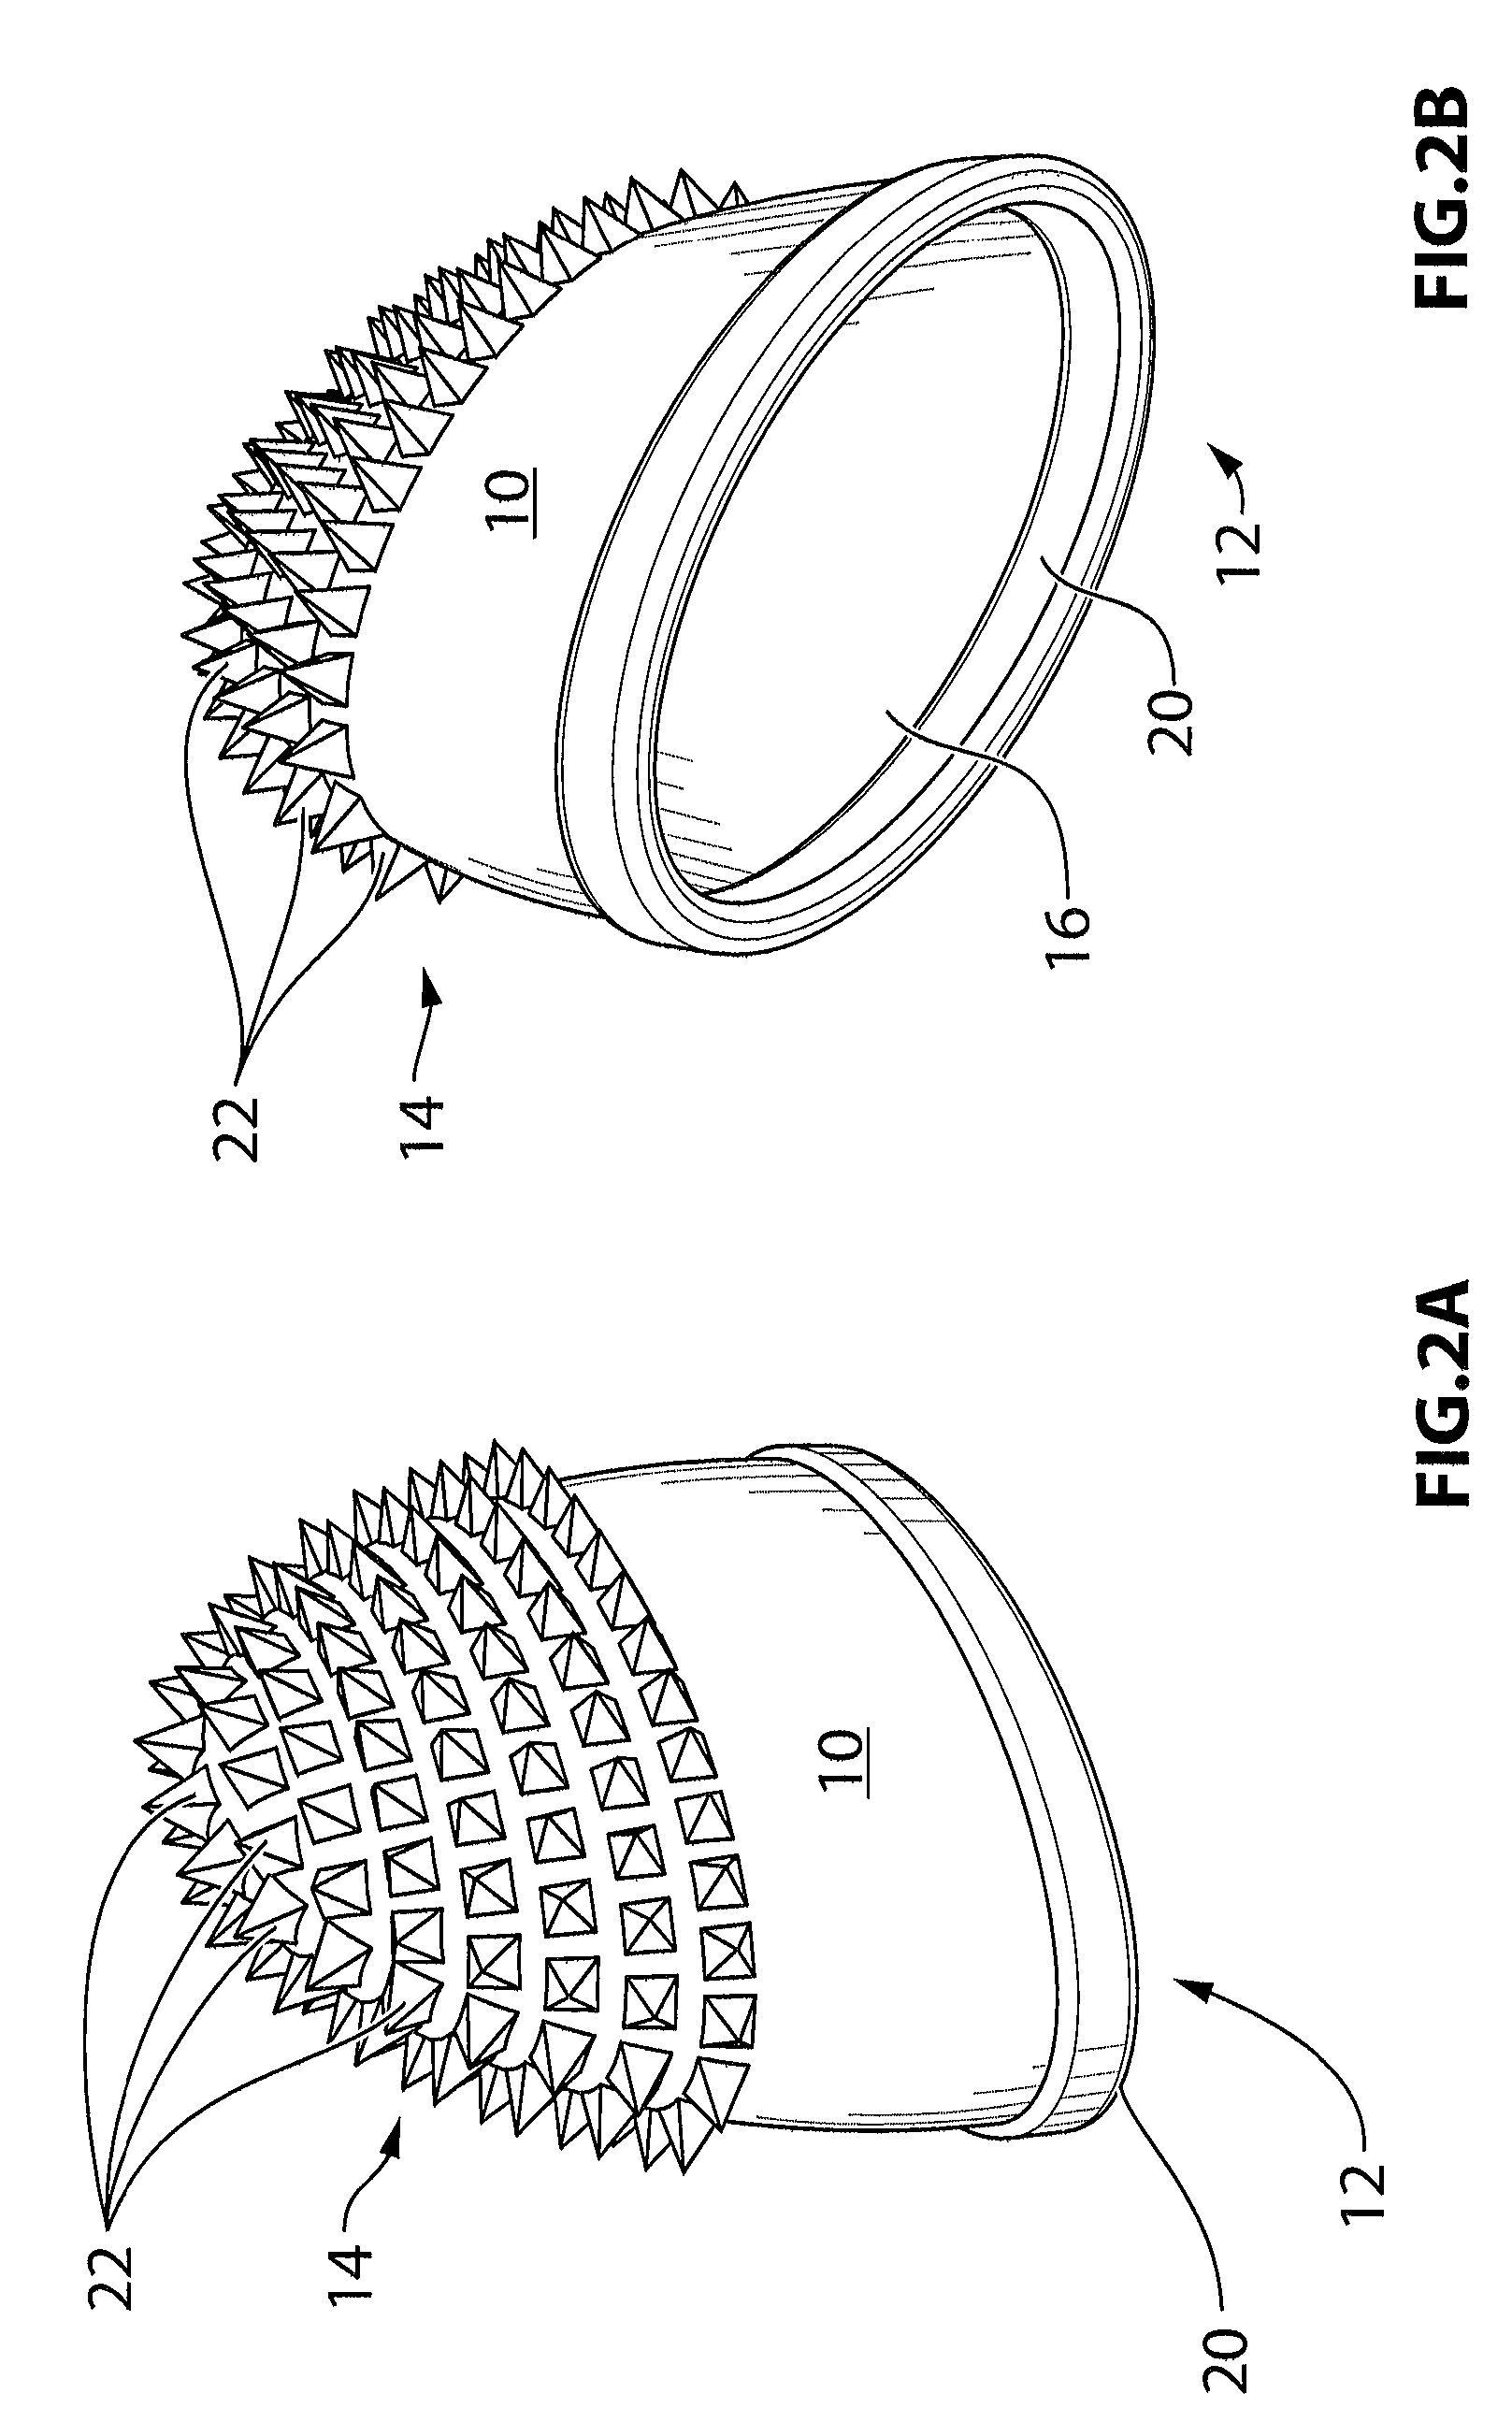 Tongue-mounted cleaning article